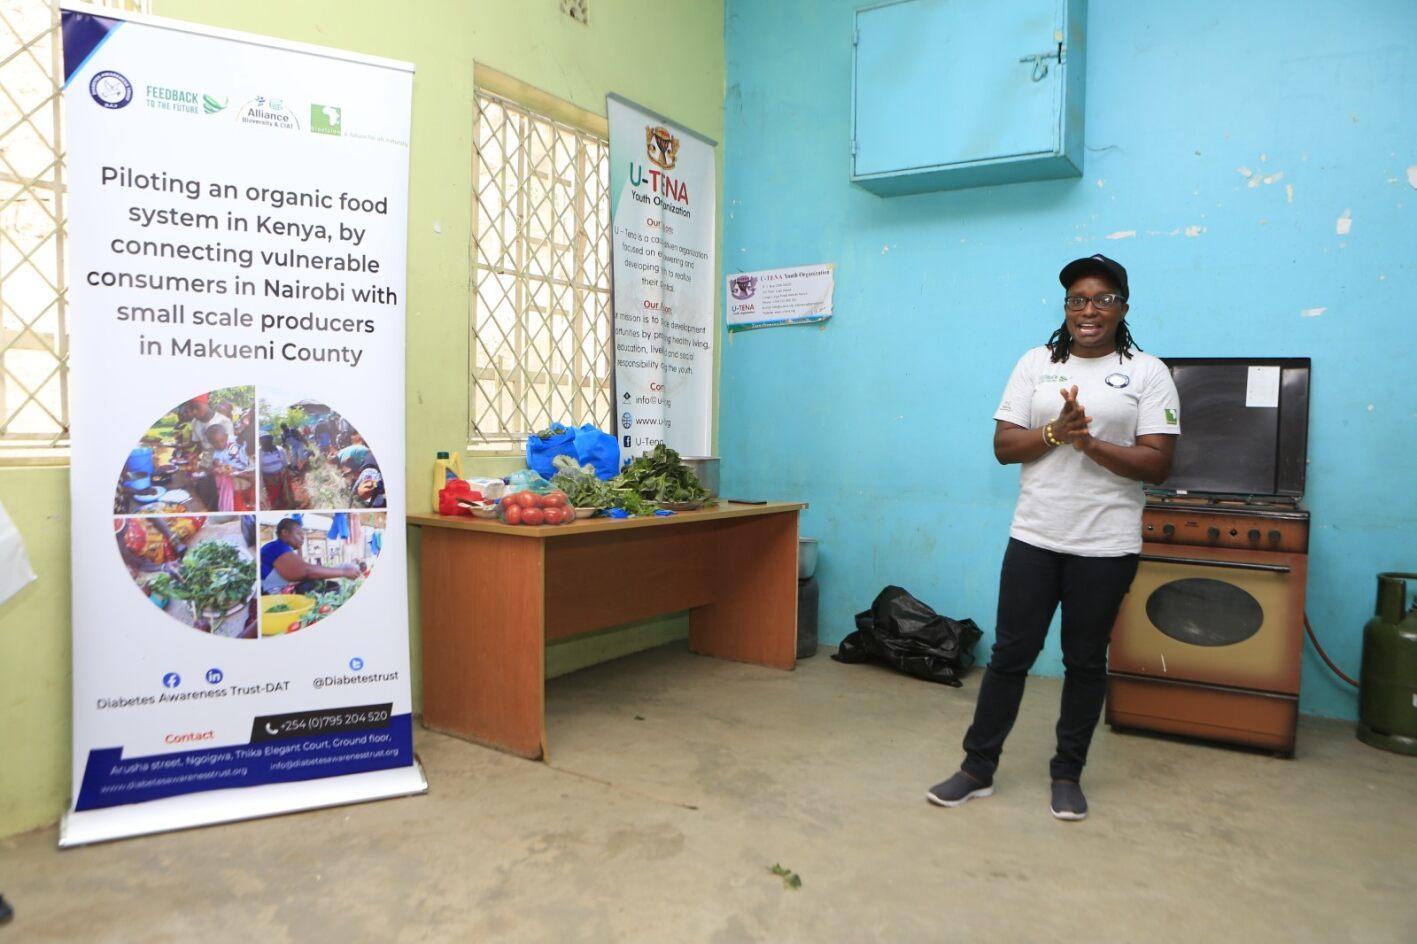 Food forests are connecting vulnerable consumers and organic farmers in Kenya - Image 13